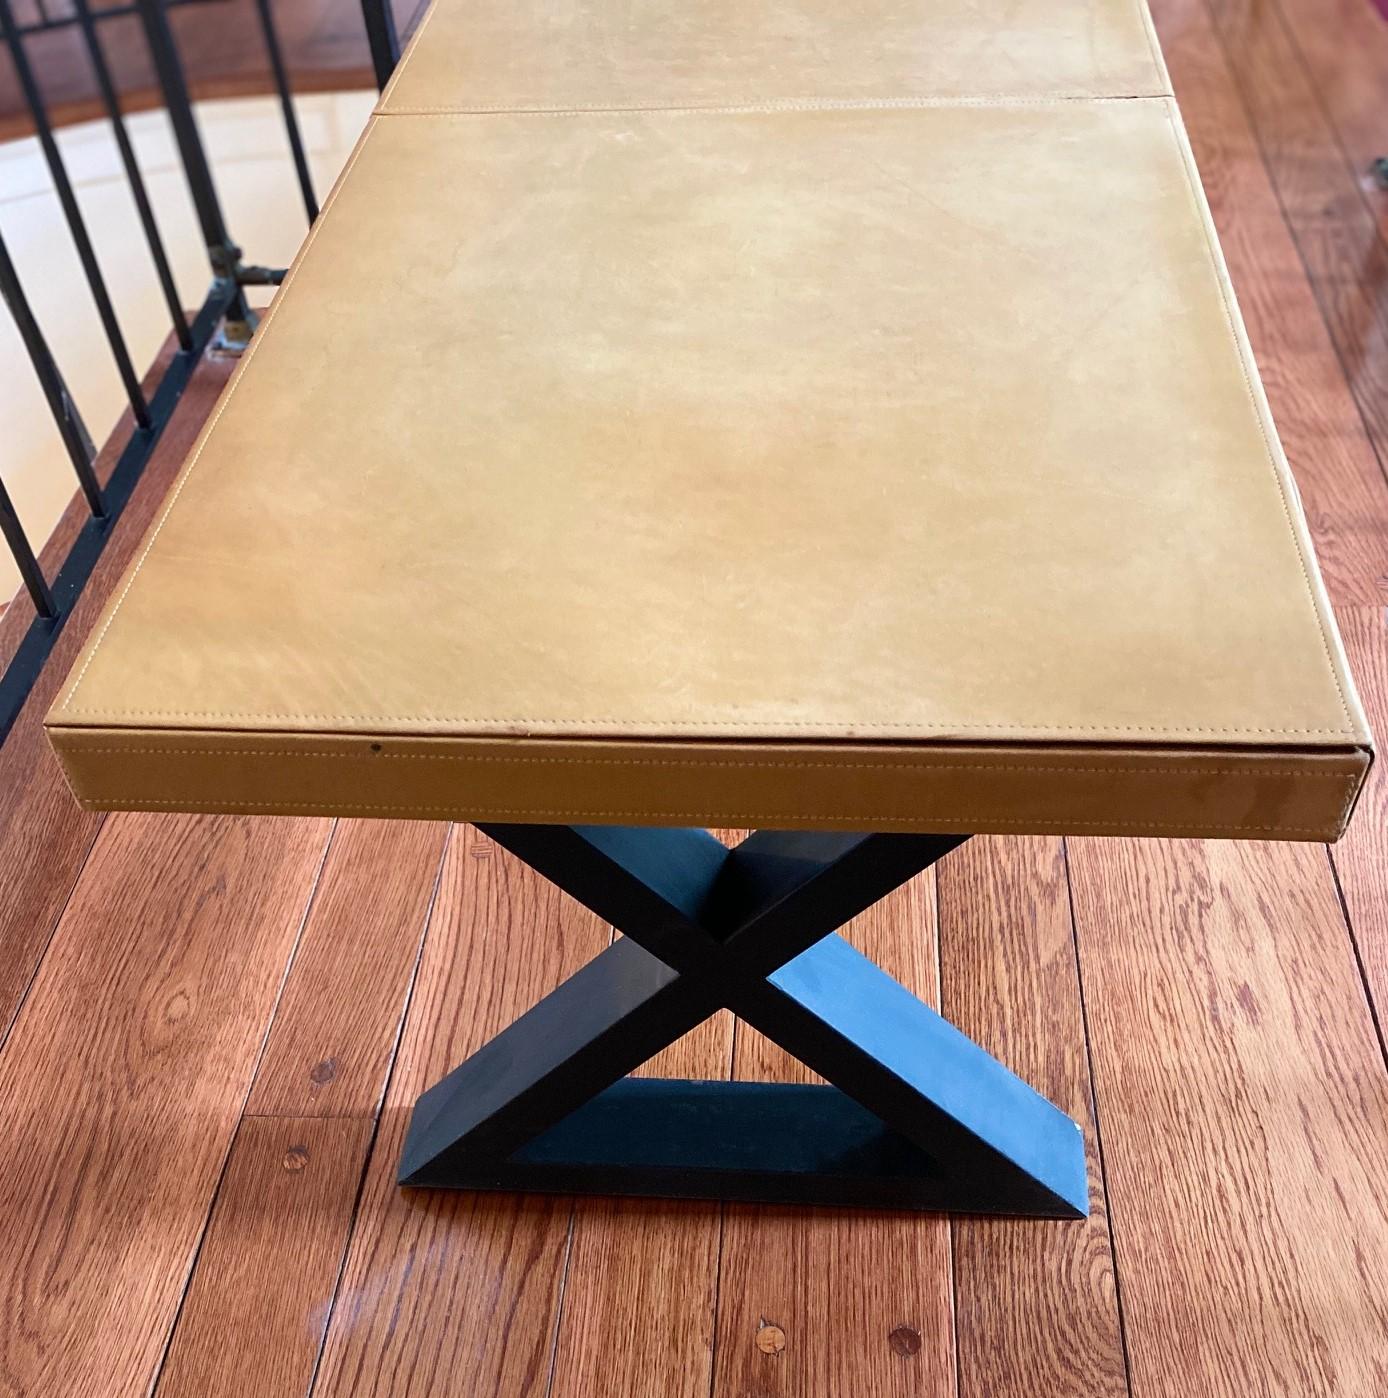 20th c., black X-form iron base with tan saddle stitched leather top, in style of Jean Michel Frank, (1895-1941, French), unmarked. This classic X-form base table packs substantial style punch. With saddle stitching on the top and sides, the leather